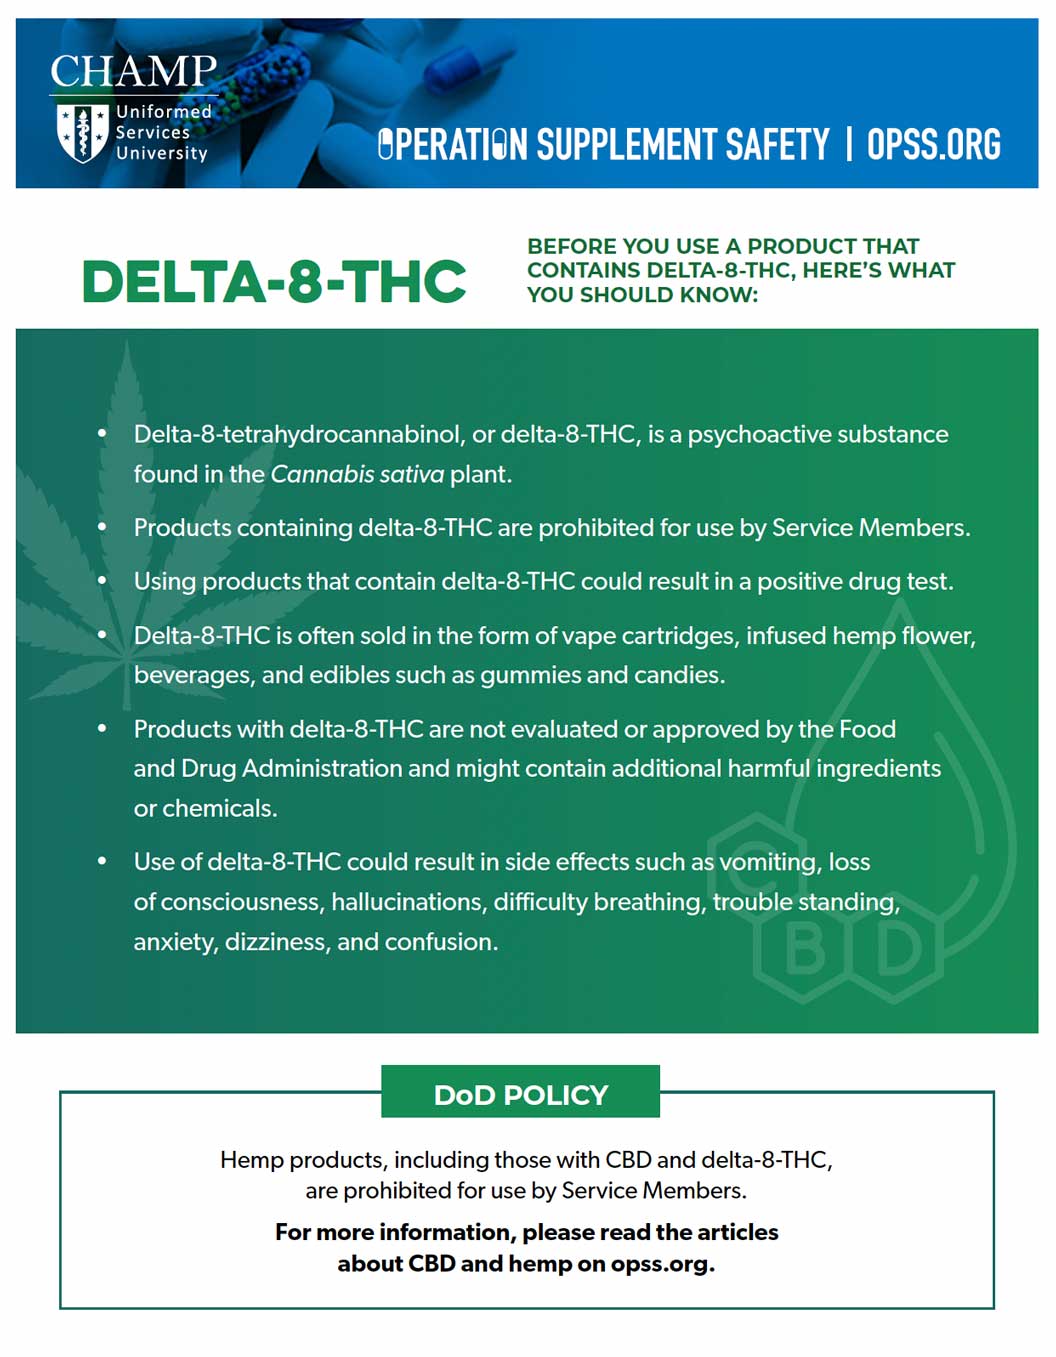 Download 508-compliant PDF for more information on Delta-8 THC